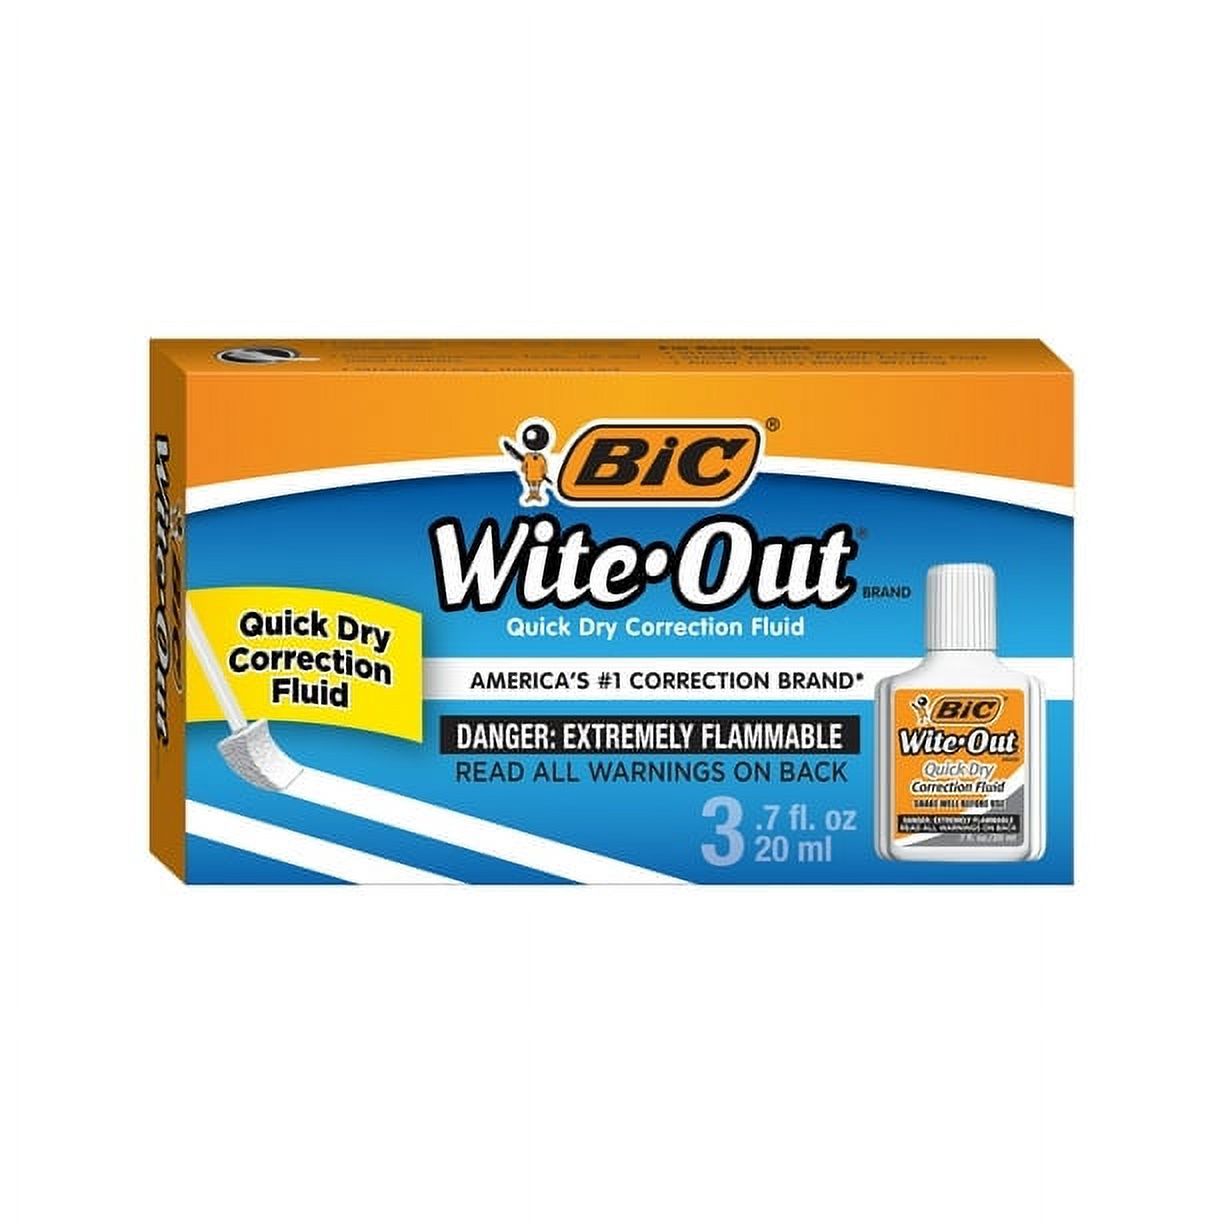 BIC Wite-Out Brand Quick Dry Correction Fluid, 20 ml, White, 3 Count - image 1 of 10